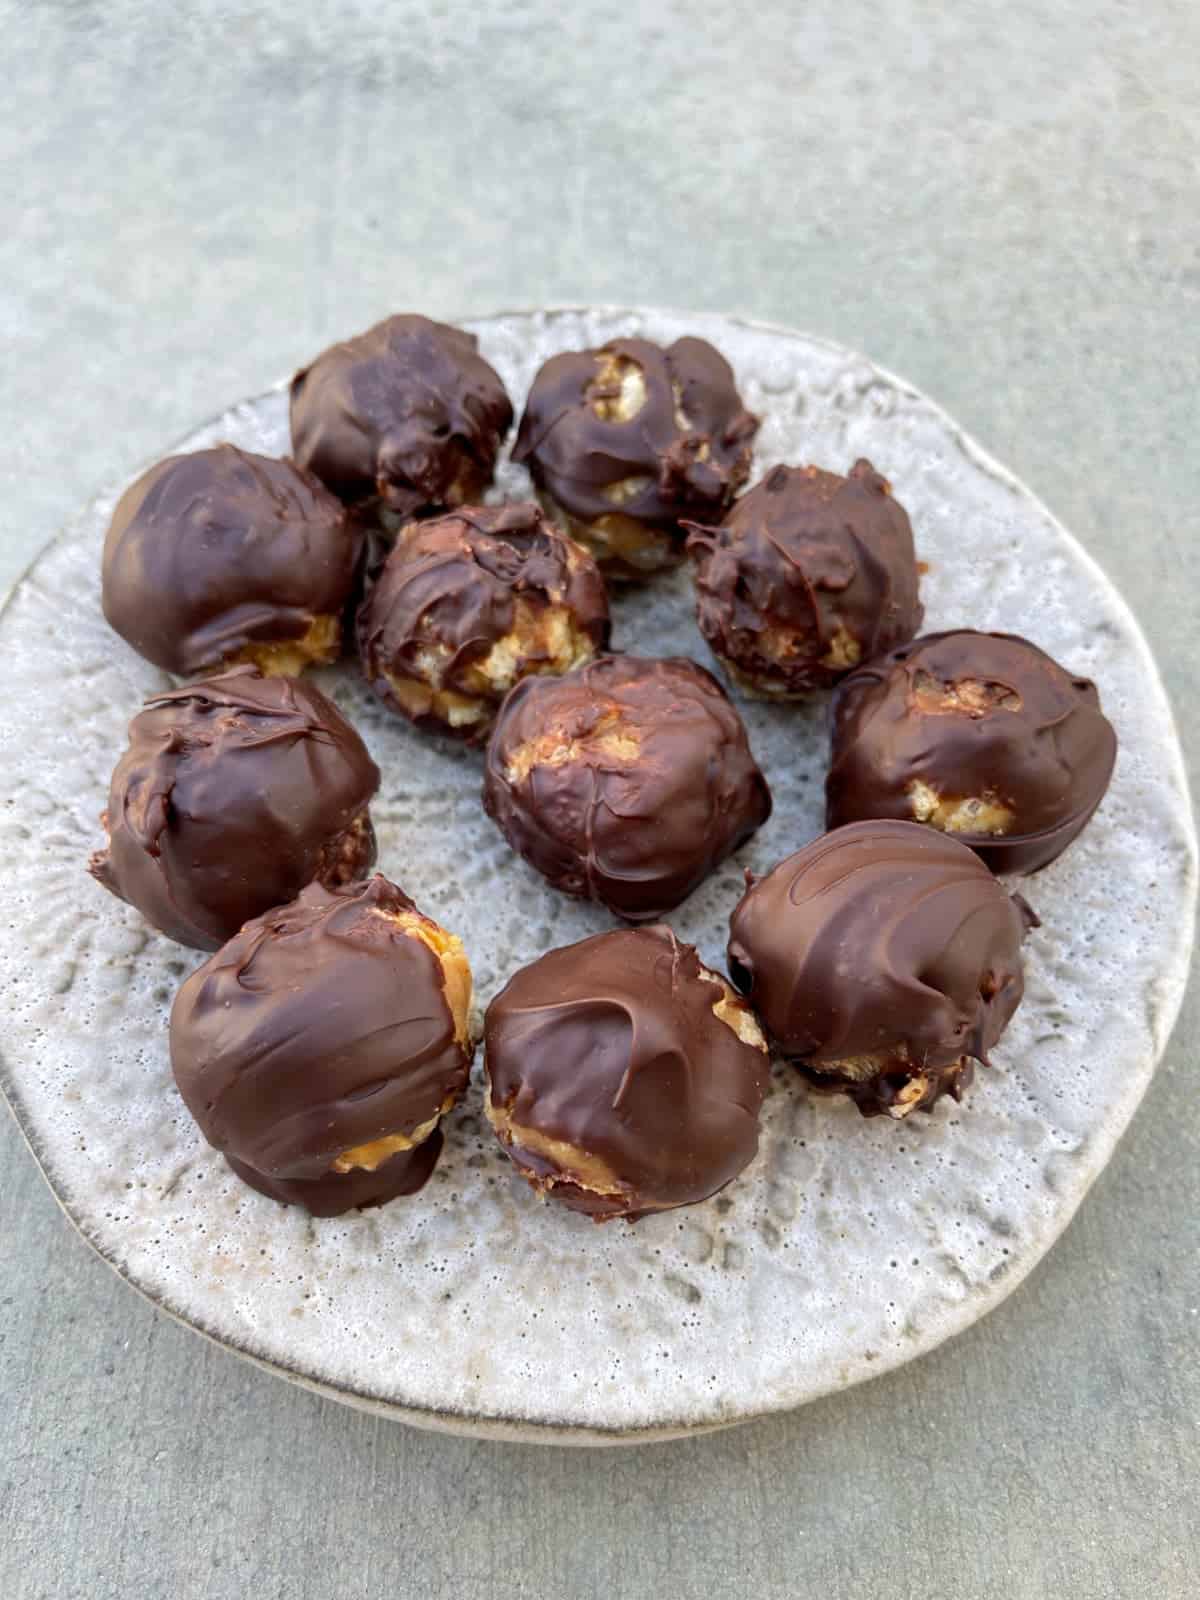 No-bake chocolate peanut butter candy bon bons on ceramic plate.